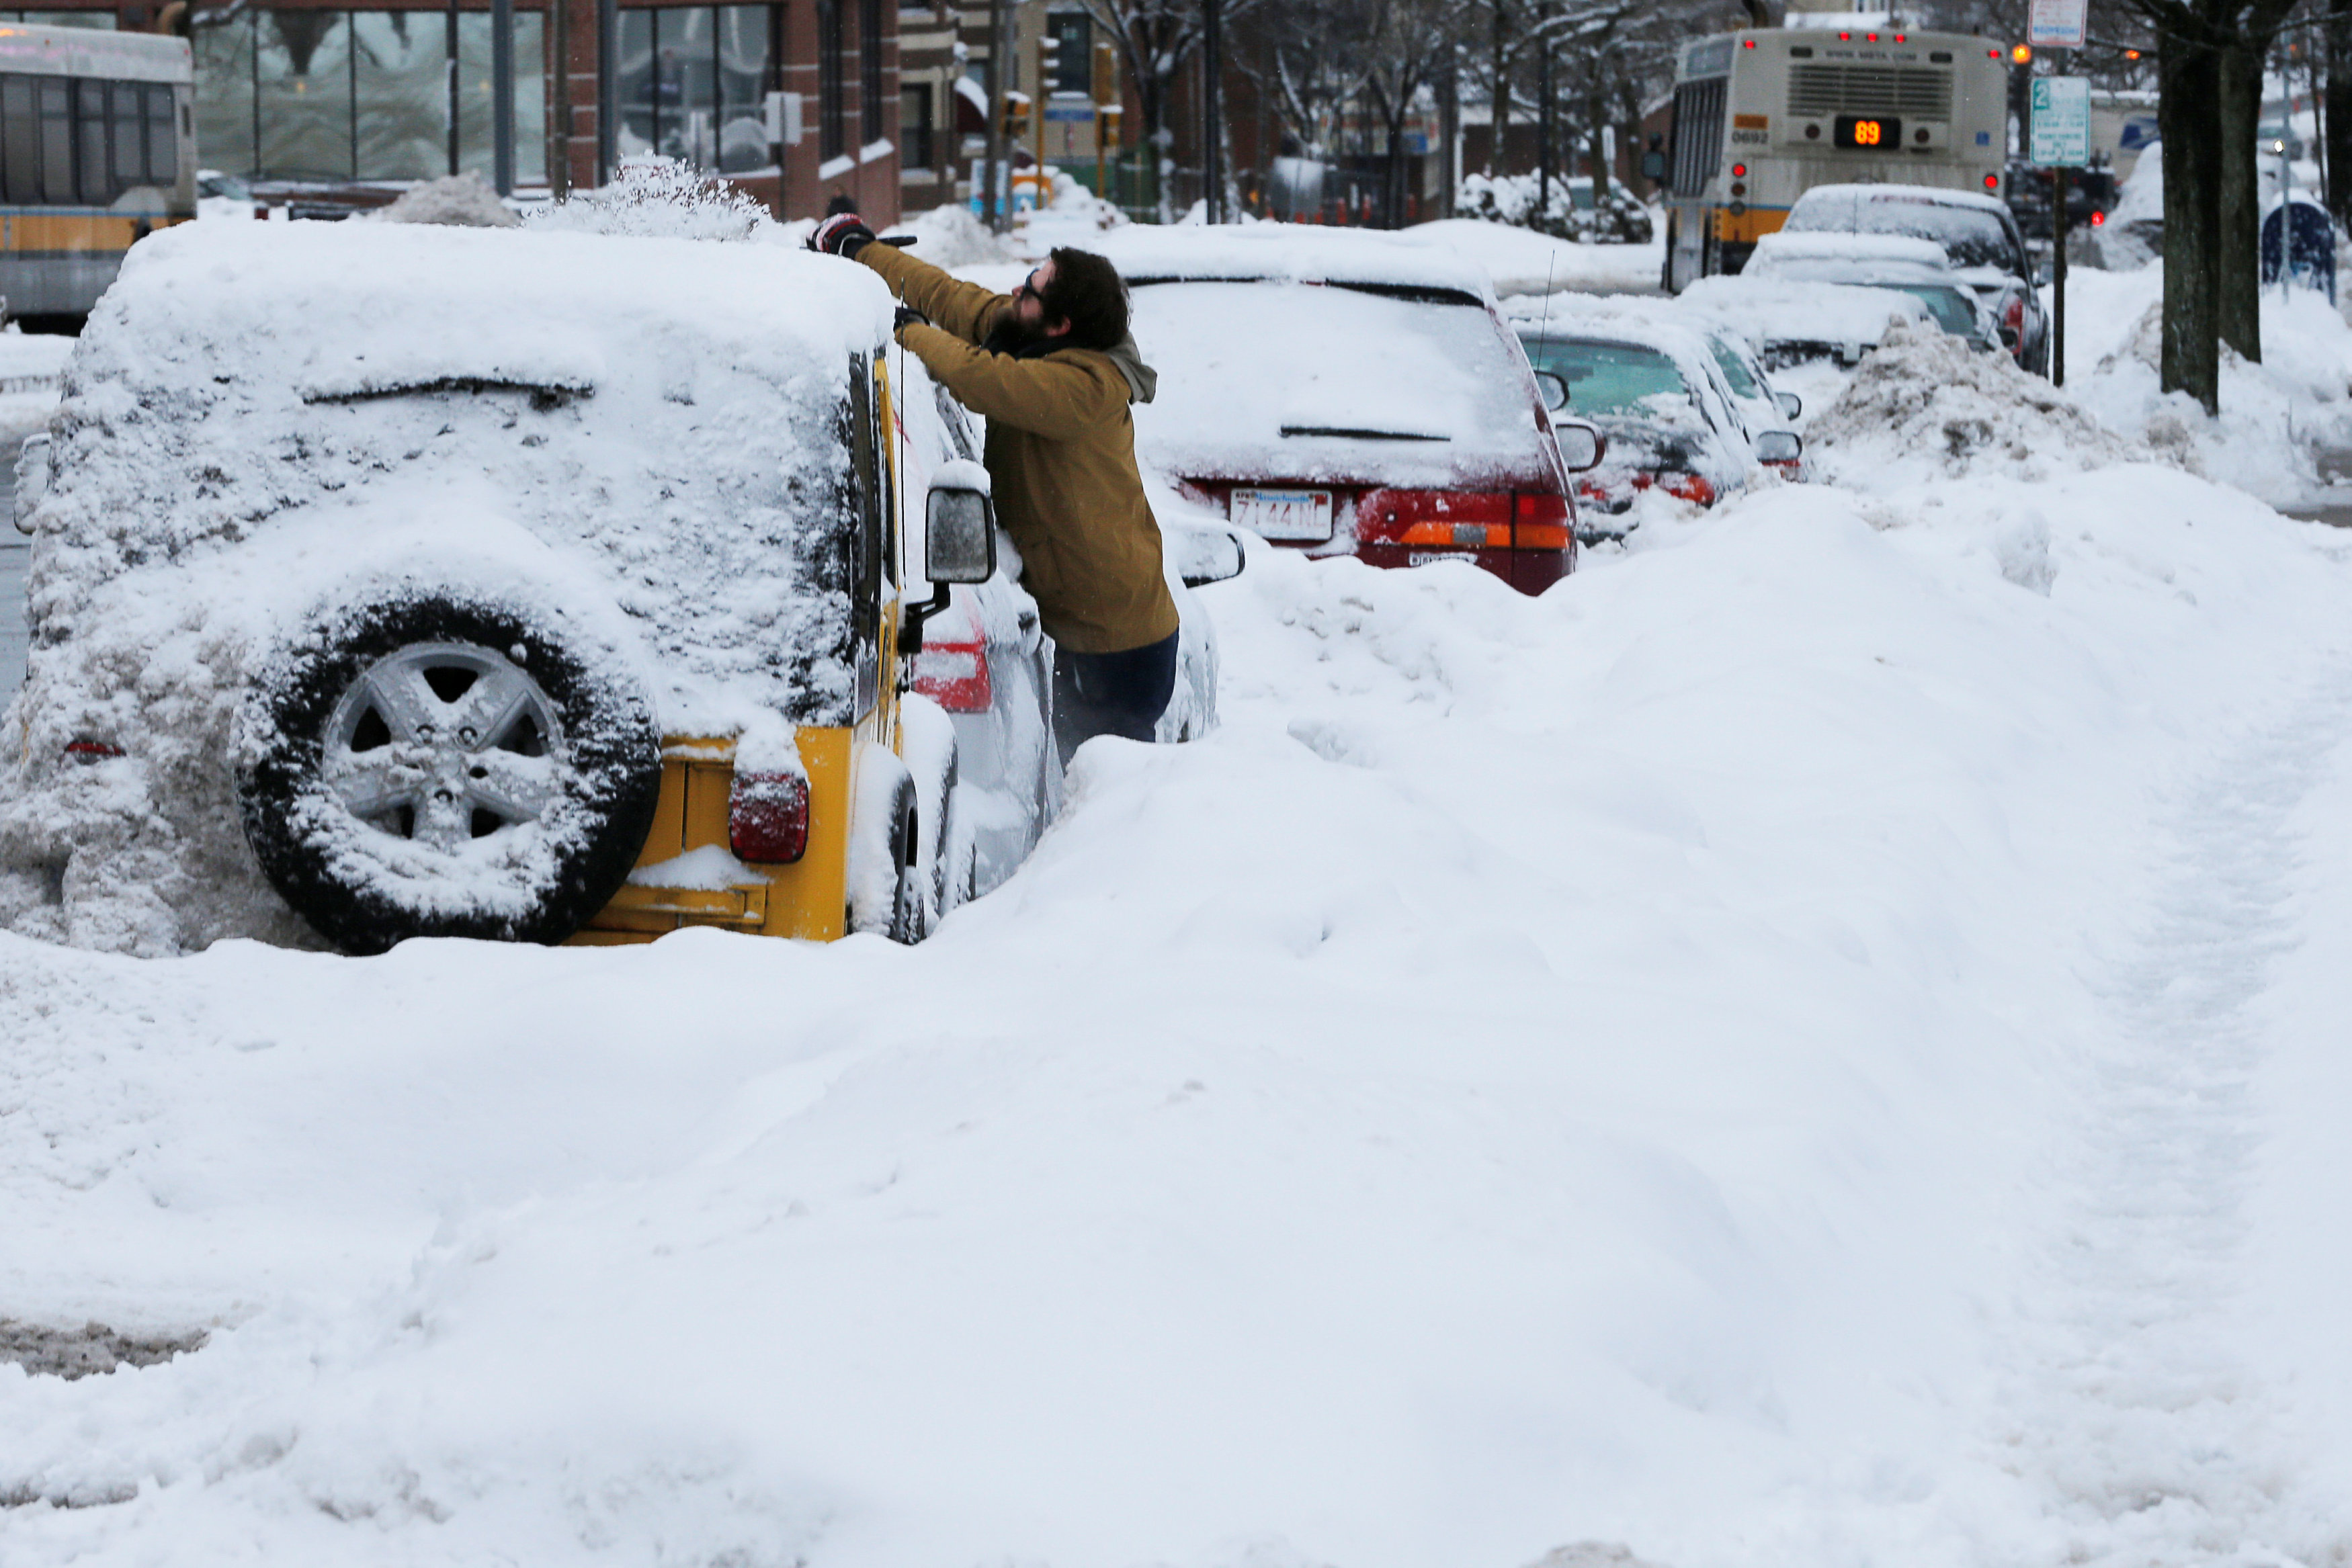 A man clears snow off his vehicle following a winter snow storm in Somerville